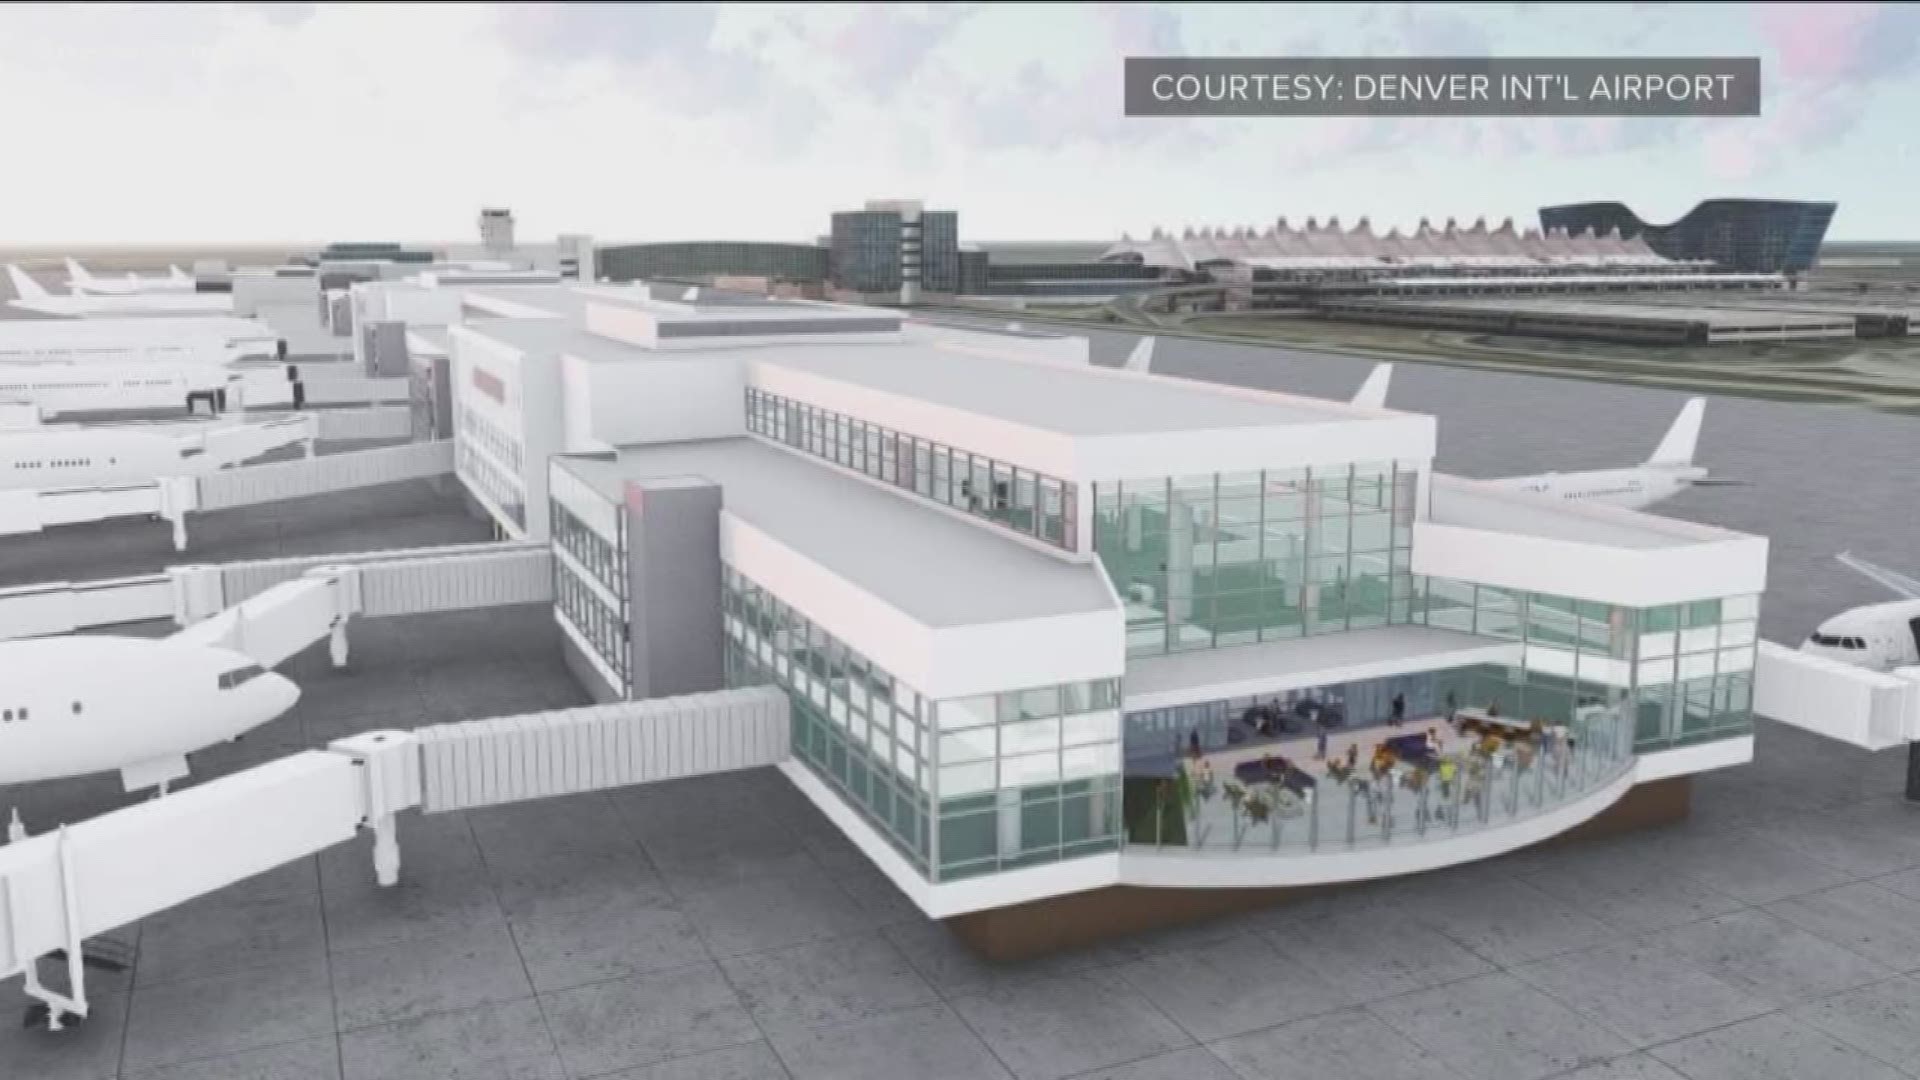 The A and C concourses will get one outdoor patio each, and B concourse will have one on both the east and west side.